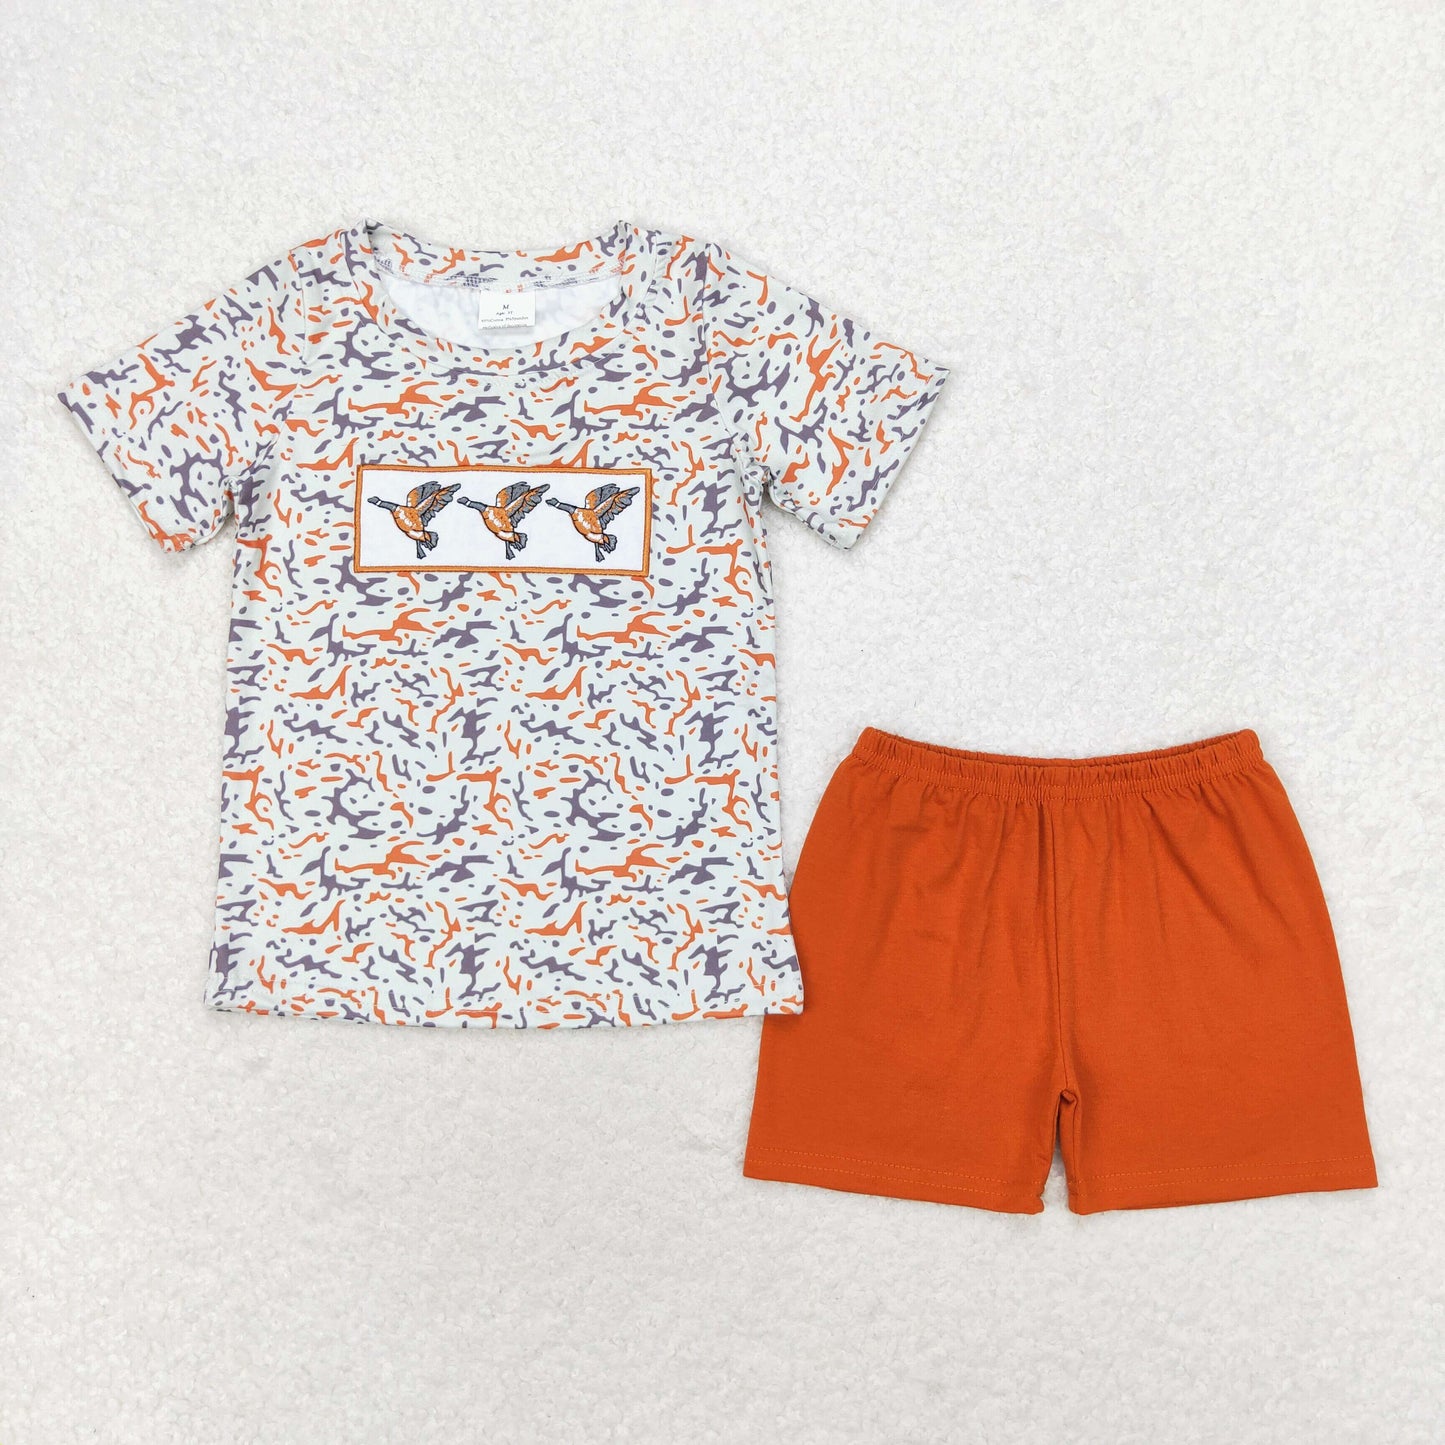 Duck Embroidery Camo Print Sibling Summer Matching Clothes